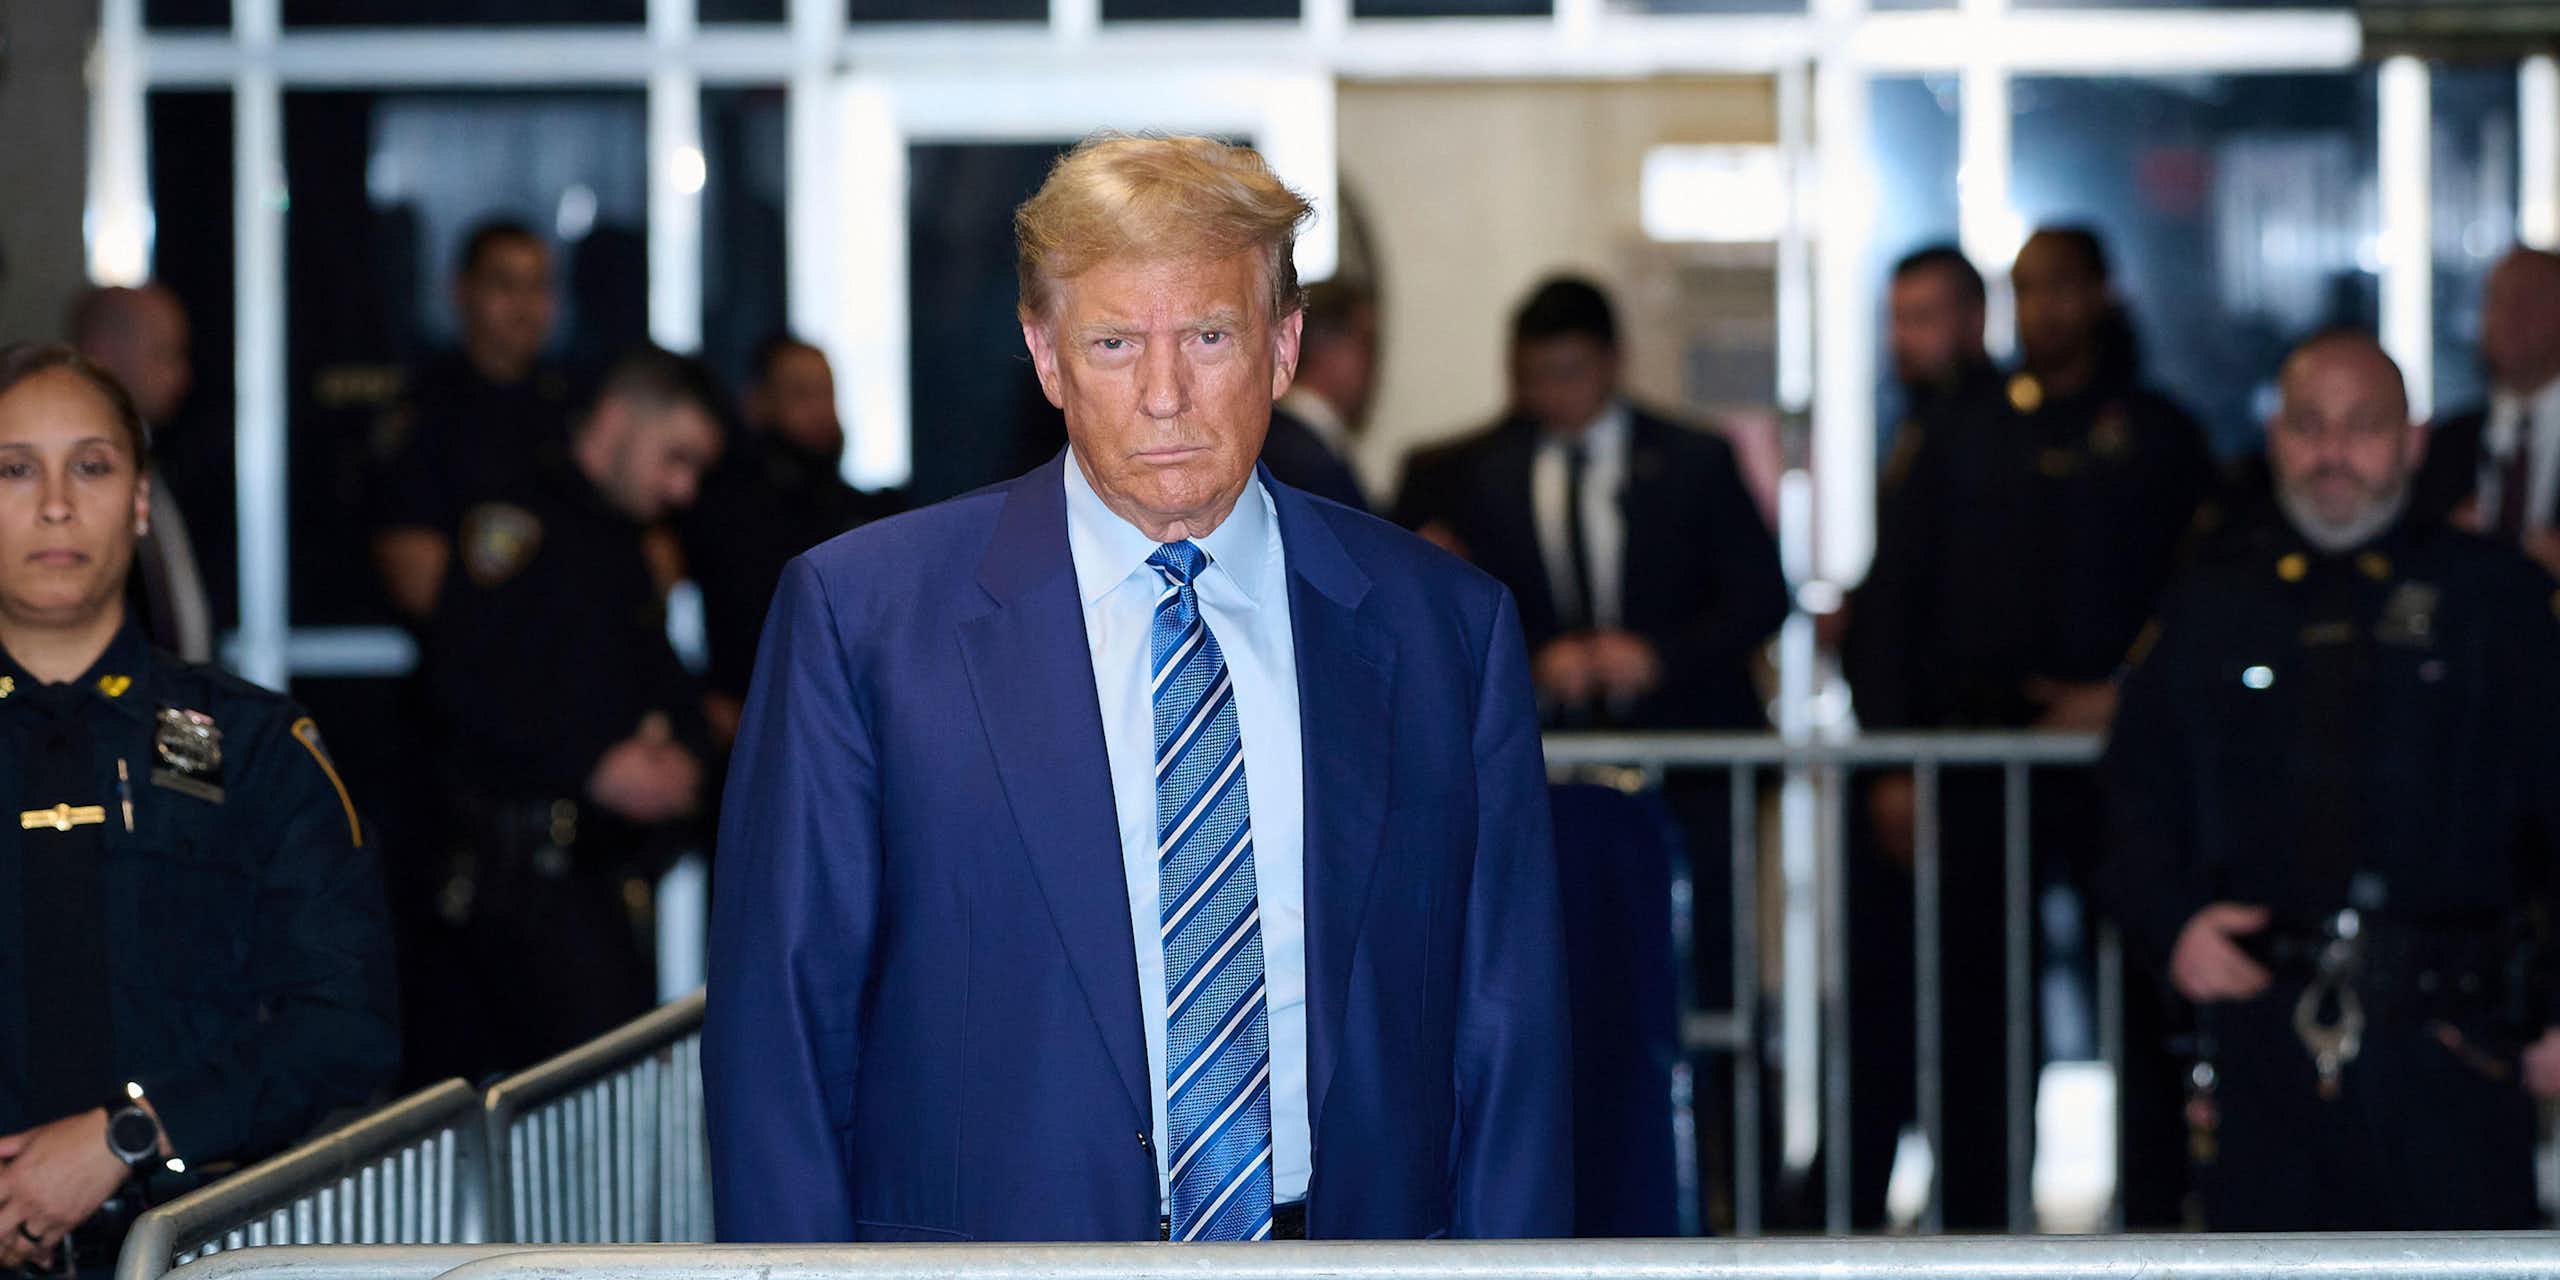 Donald Trump in a blue suit near to a court.